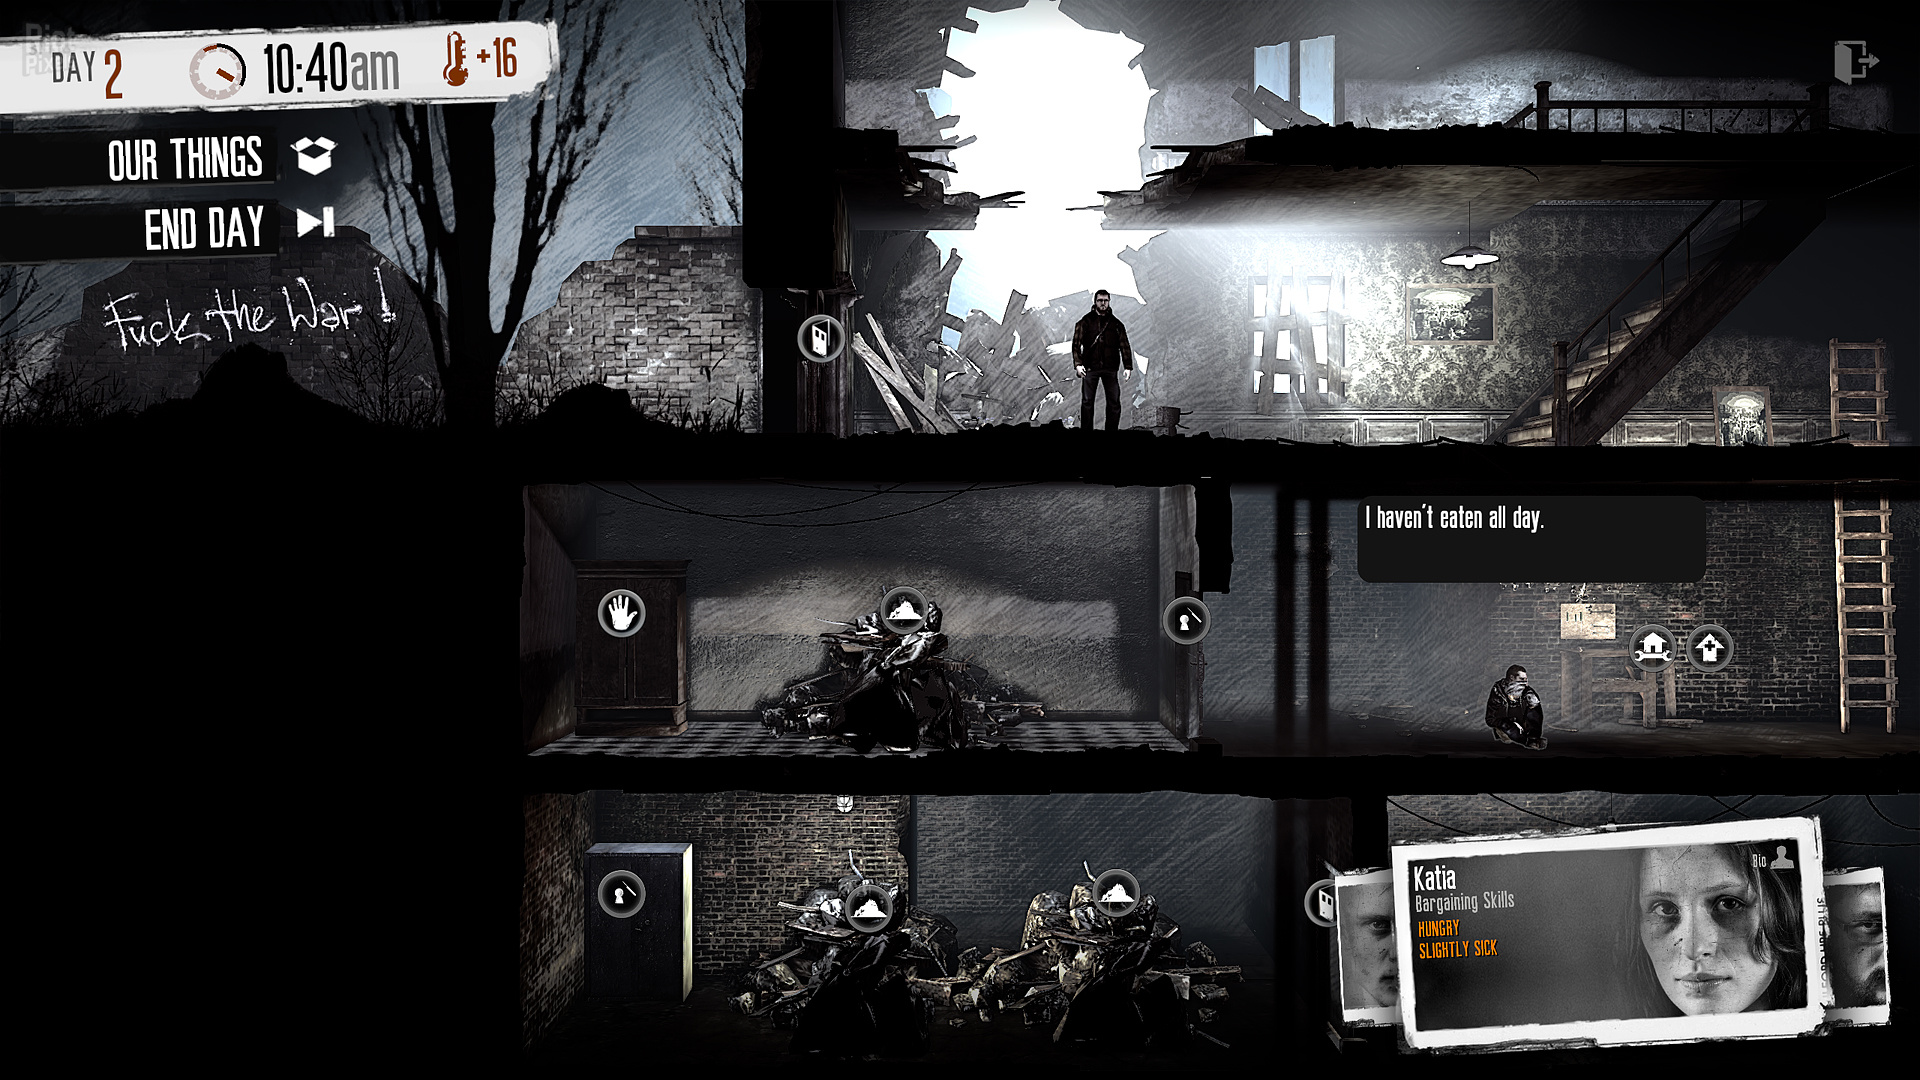 download this war of mine complete edition for free